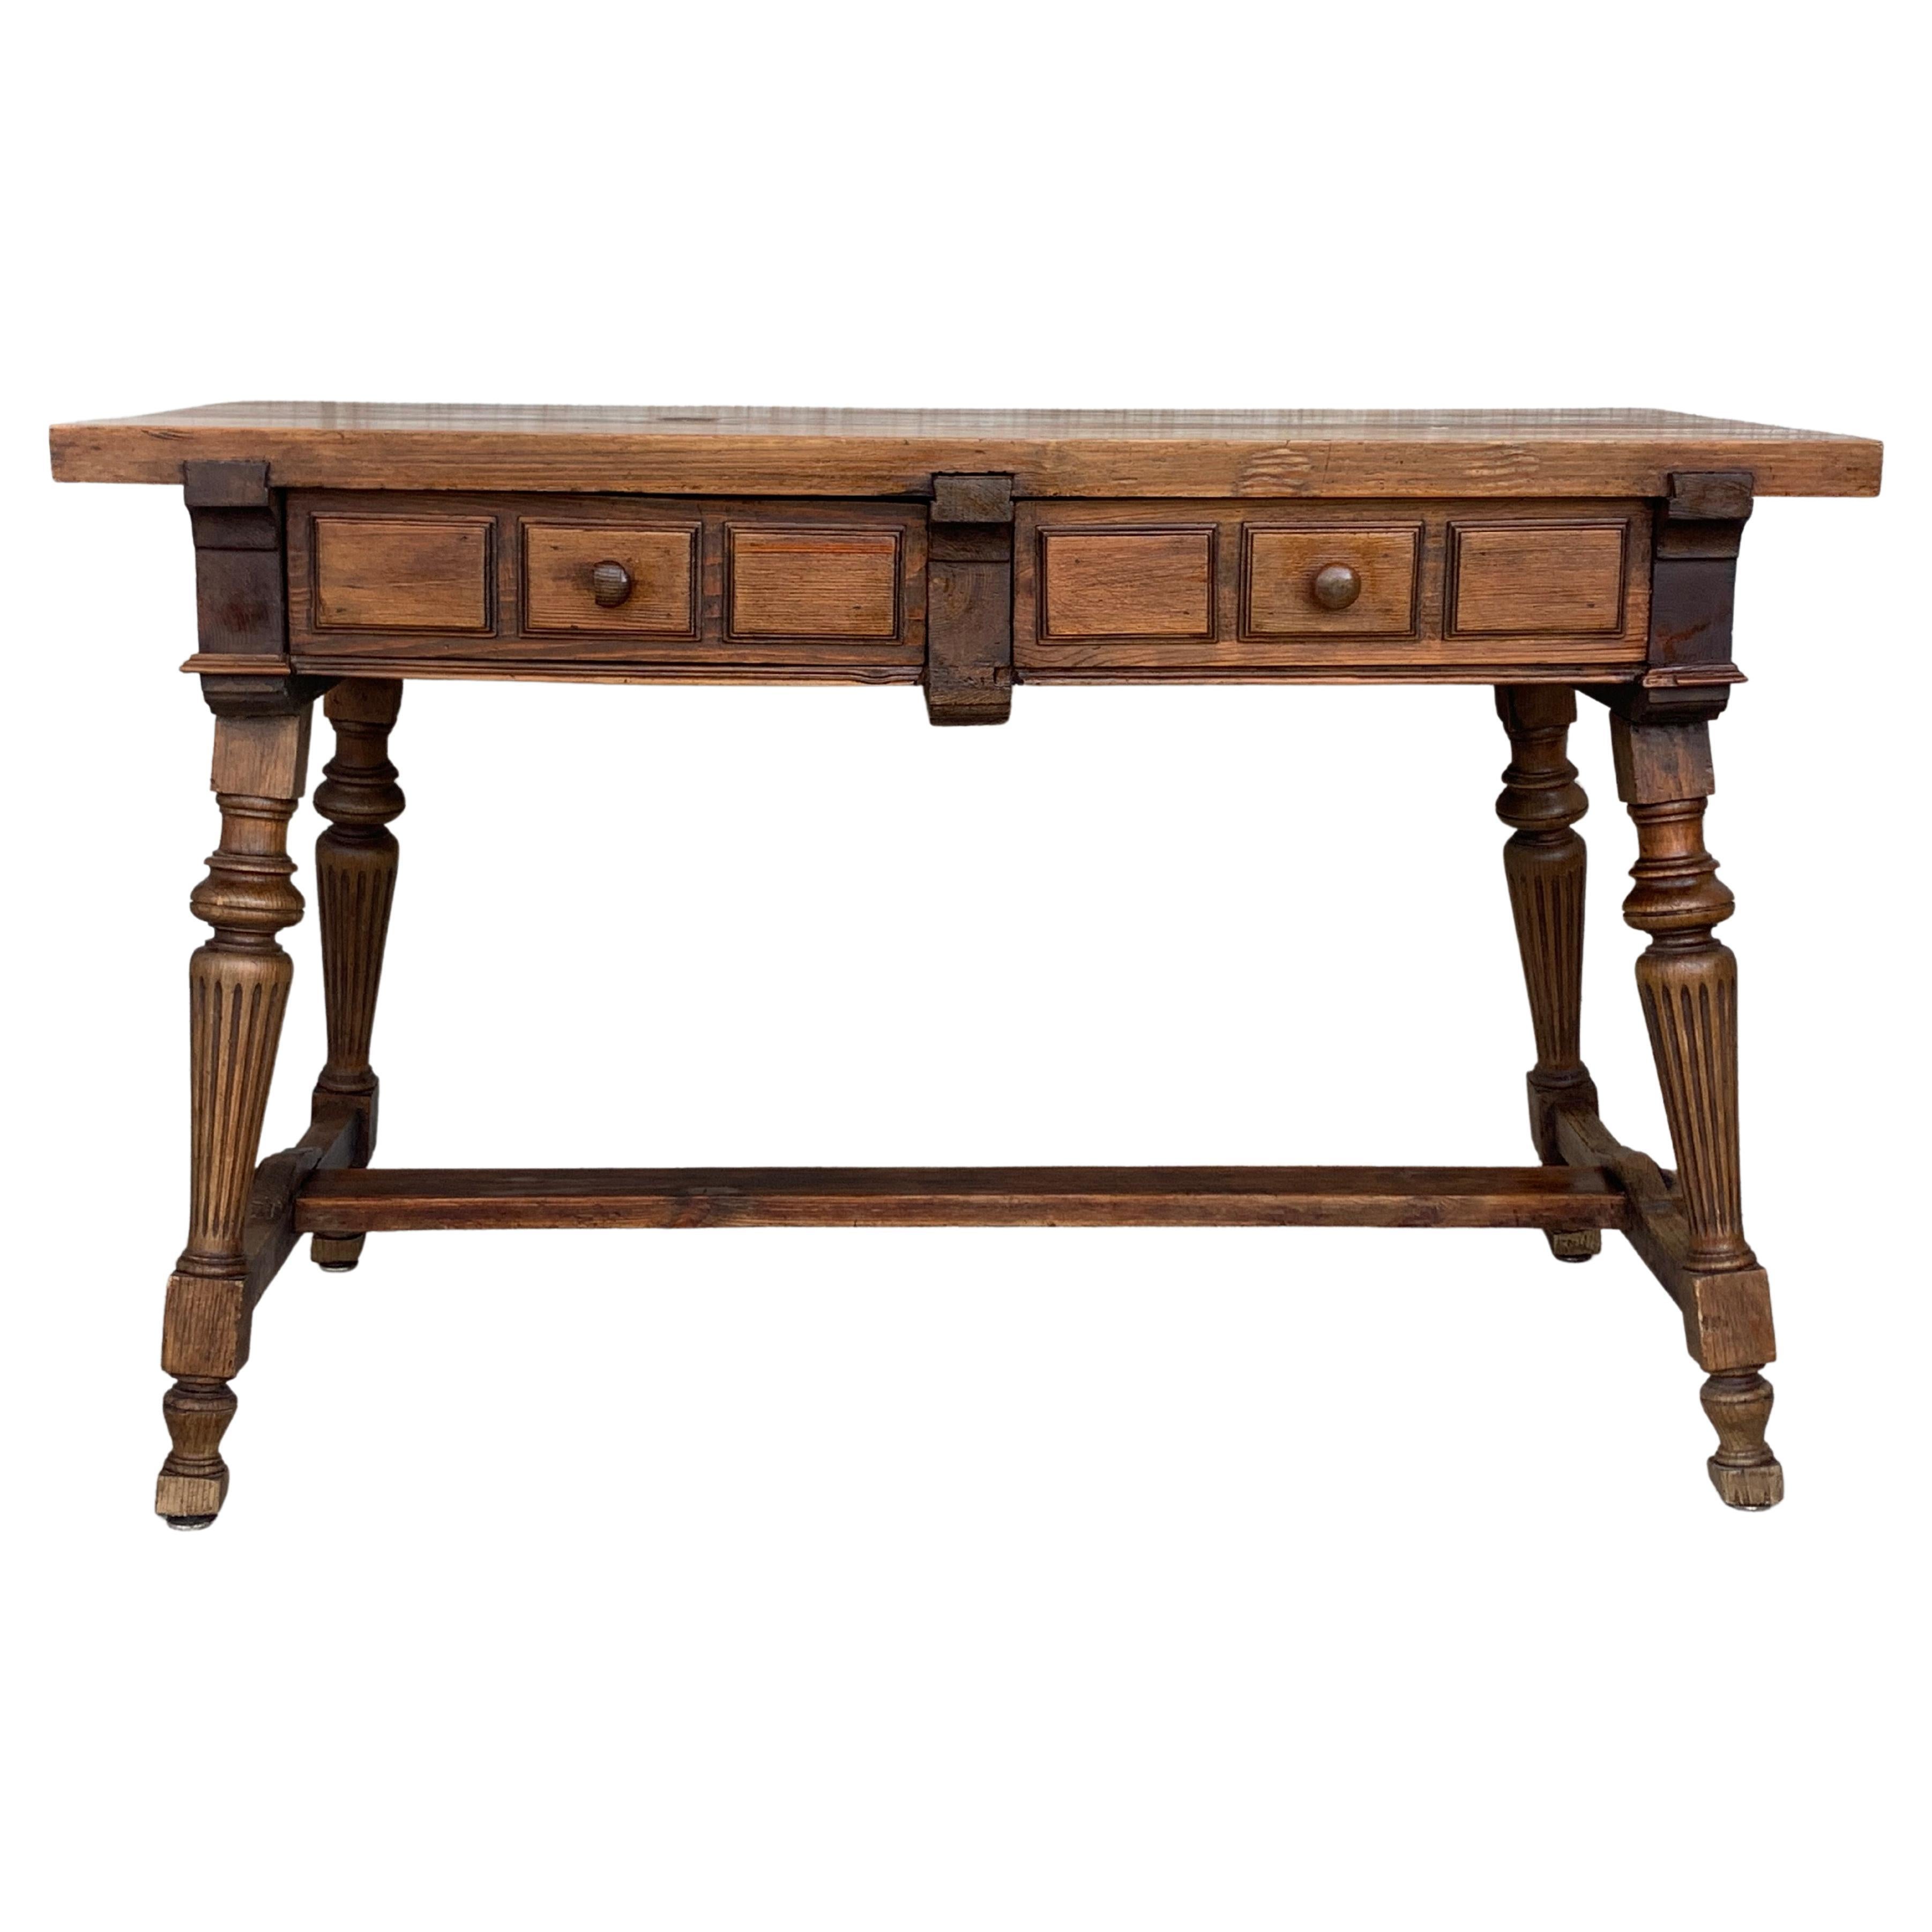 19th Century Solid Oak Baroque Fluted Legs Desk Writing Table or Console